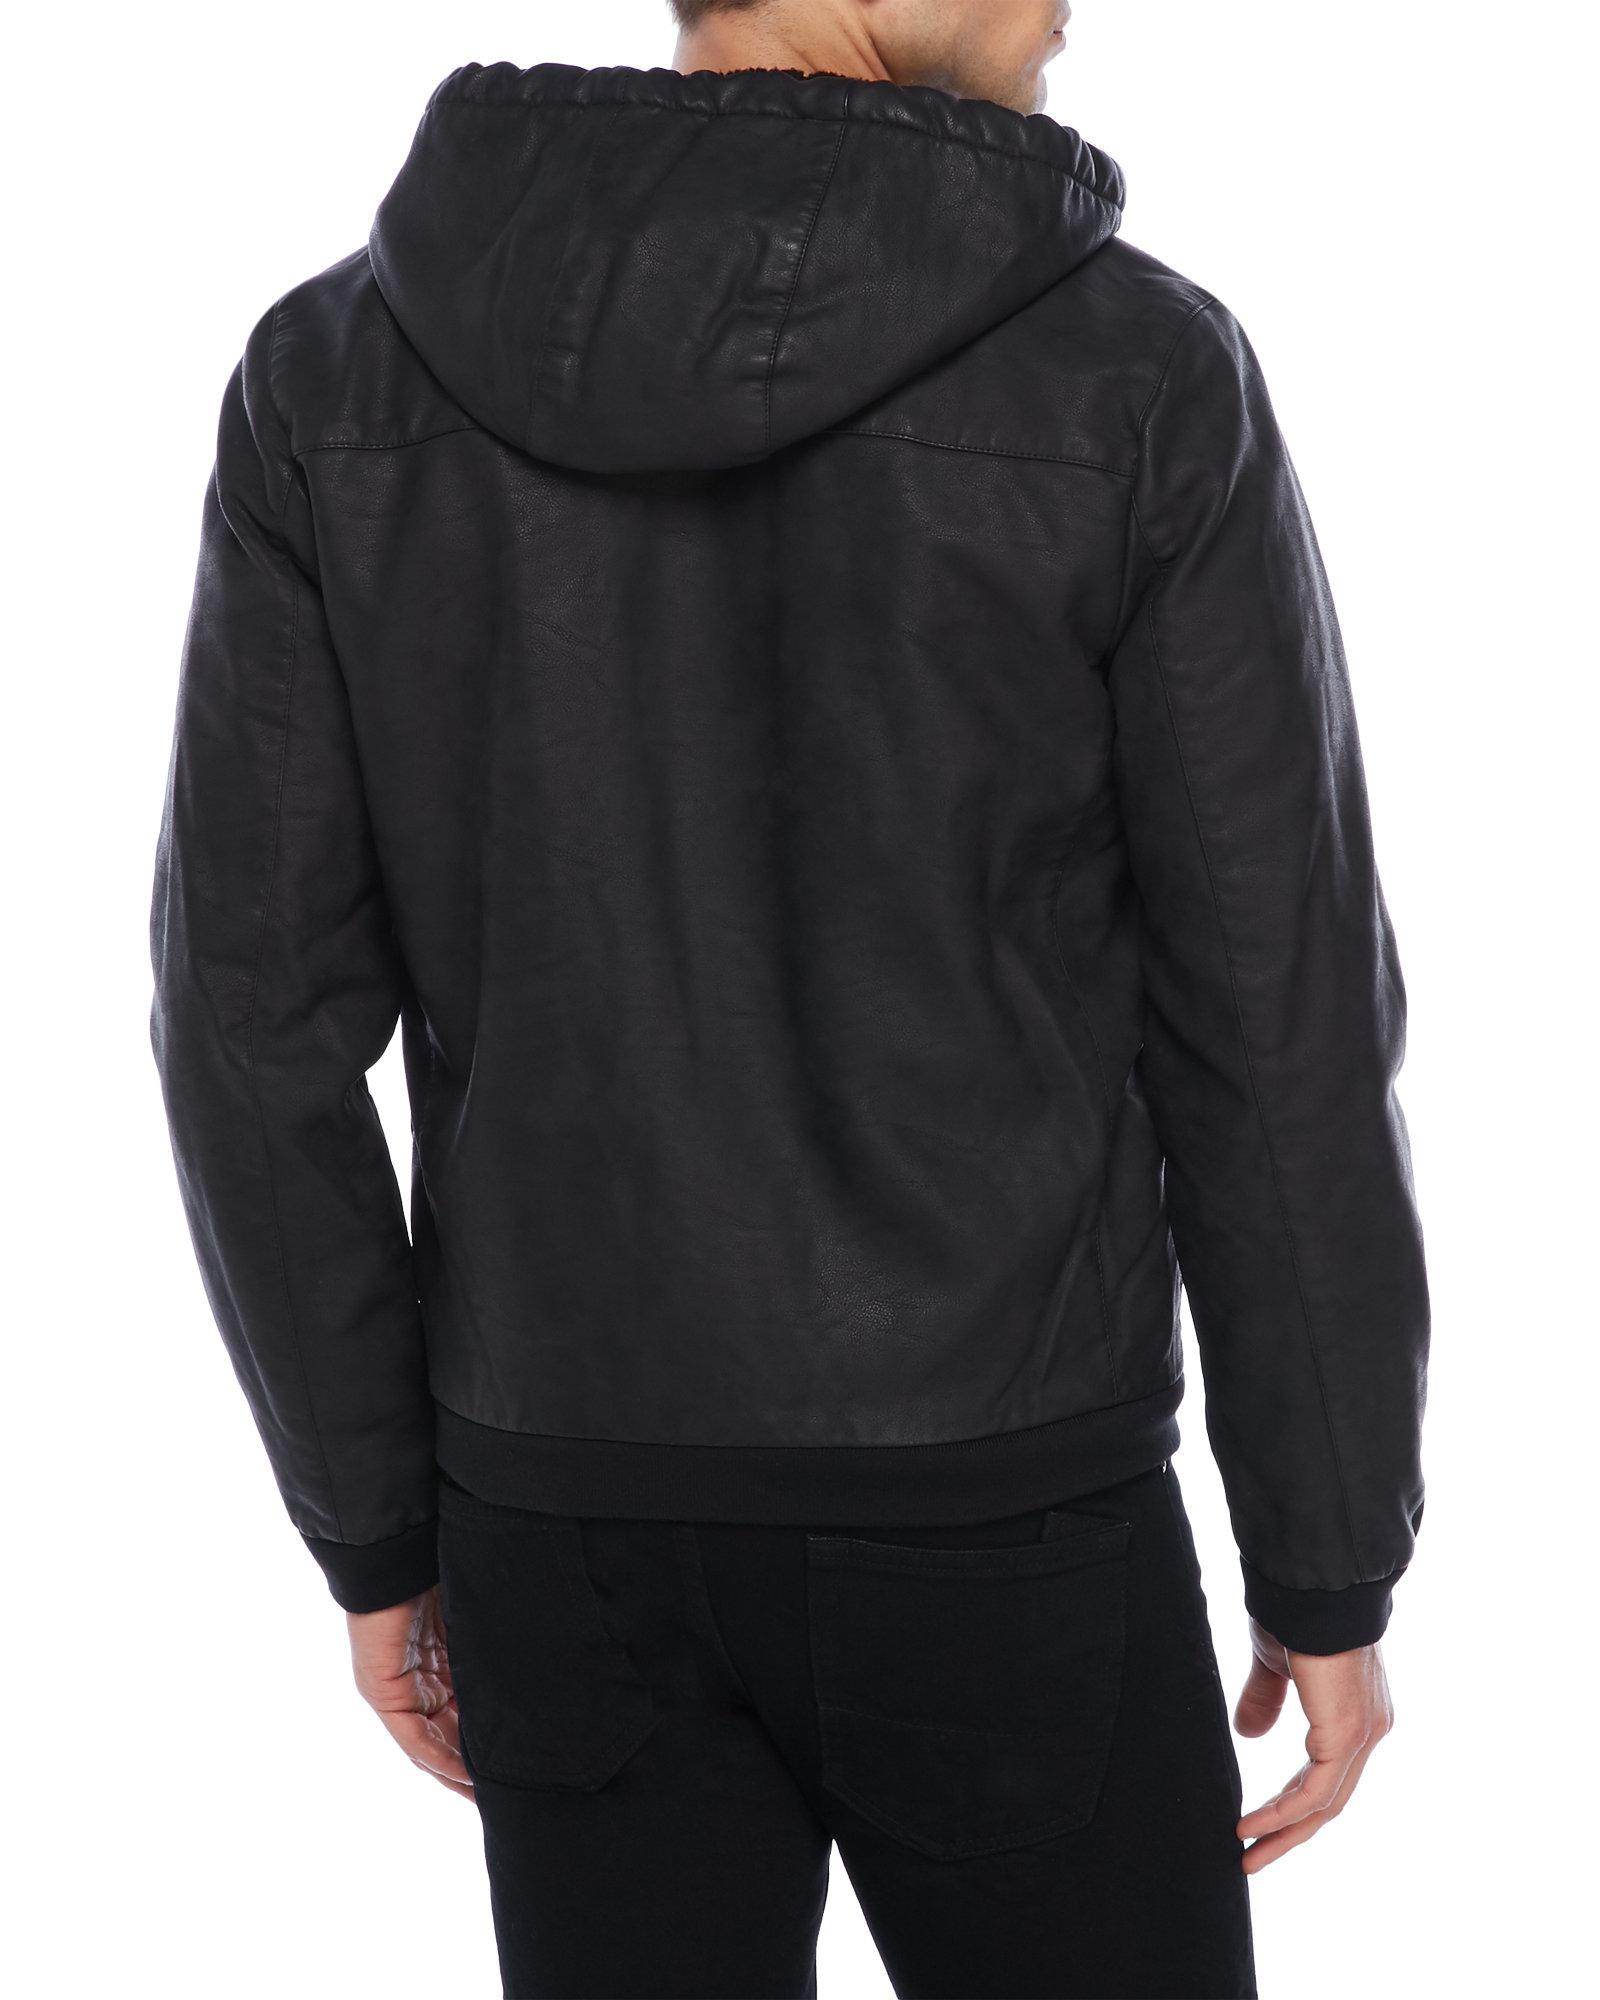 Lyst - Levi'S Faux Leather Hooded Bomber Jacket in Black for Men